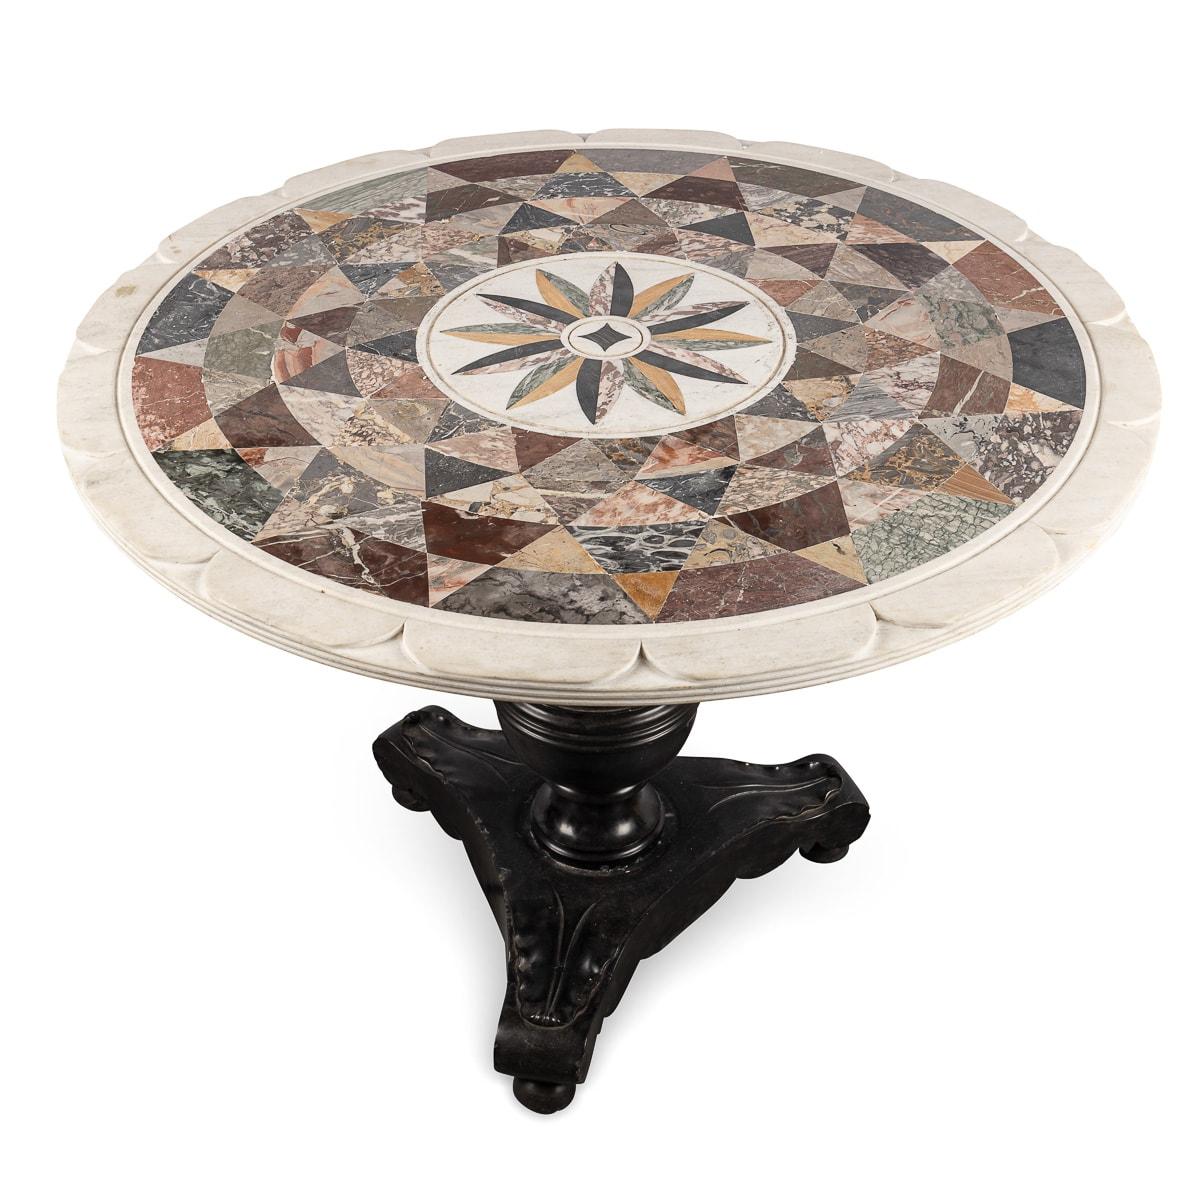 Other Mid 20th Century Italian Pietre Dure Mosaic Marble Round Occasional Table For Sale